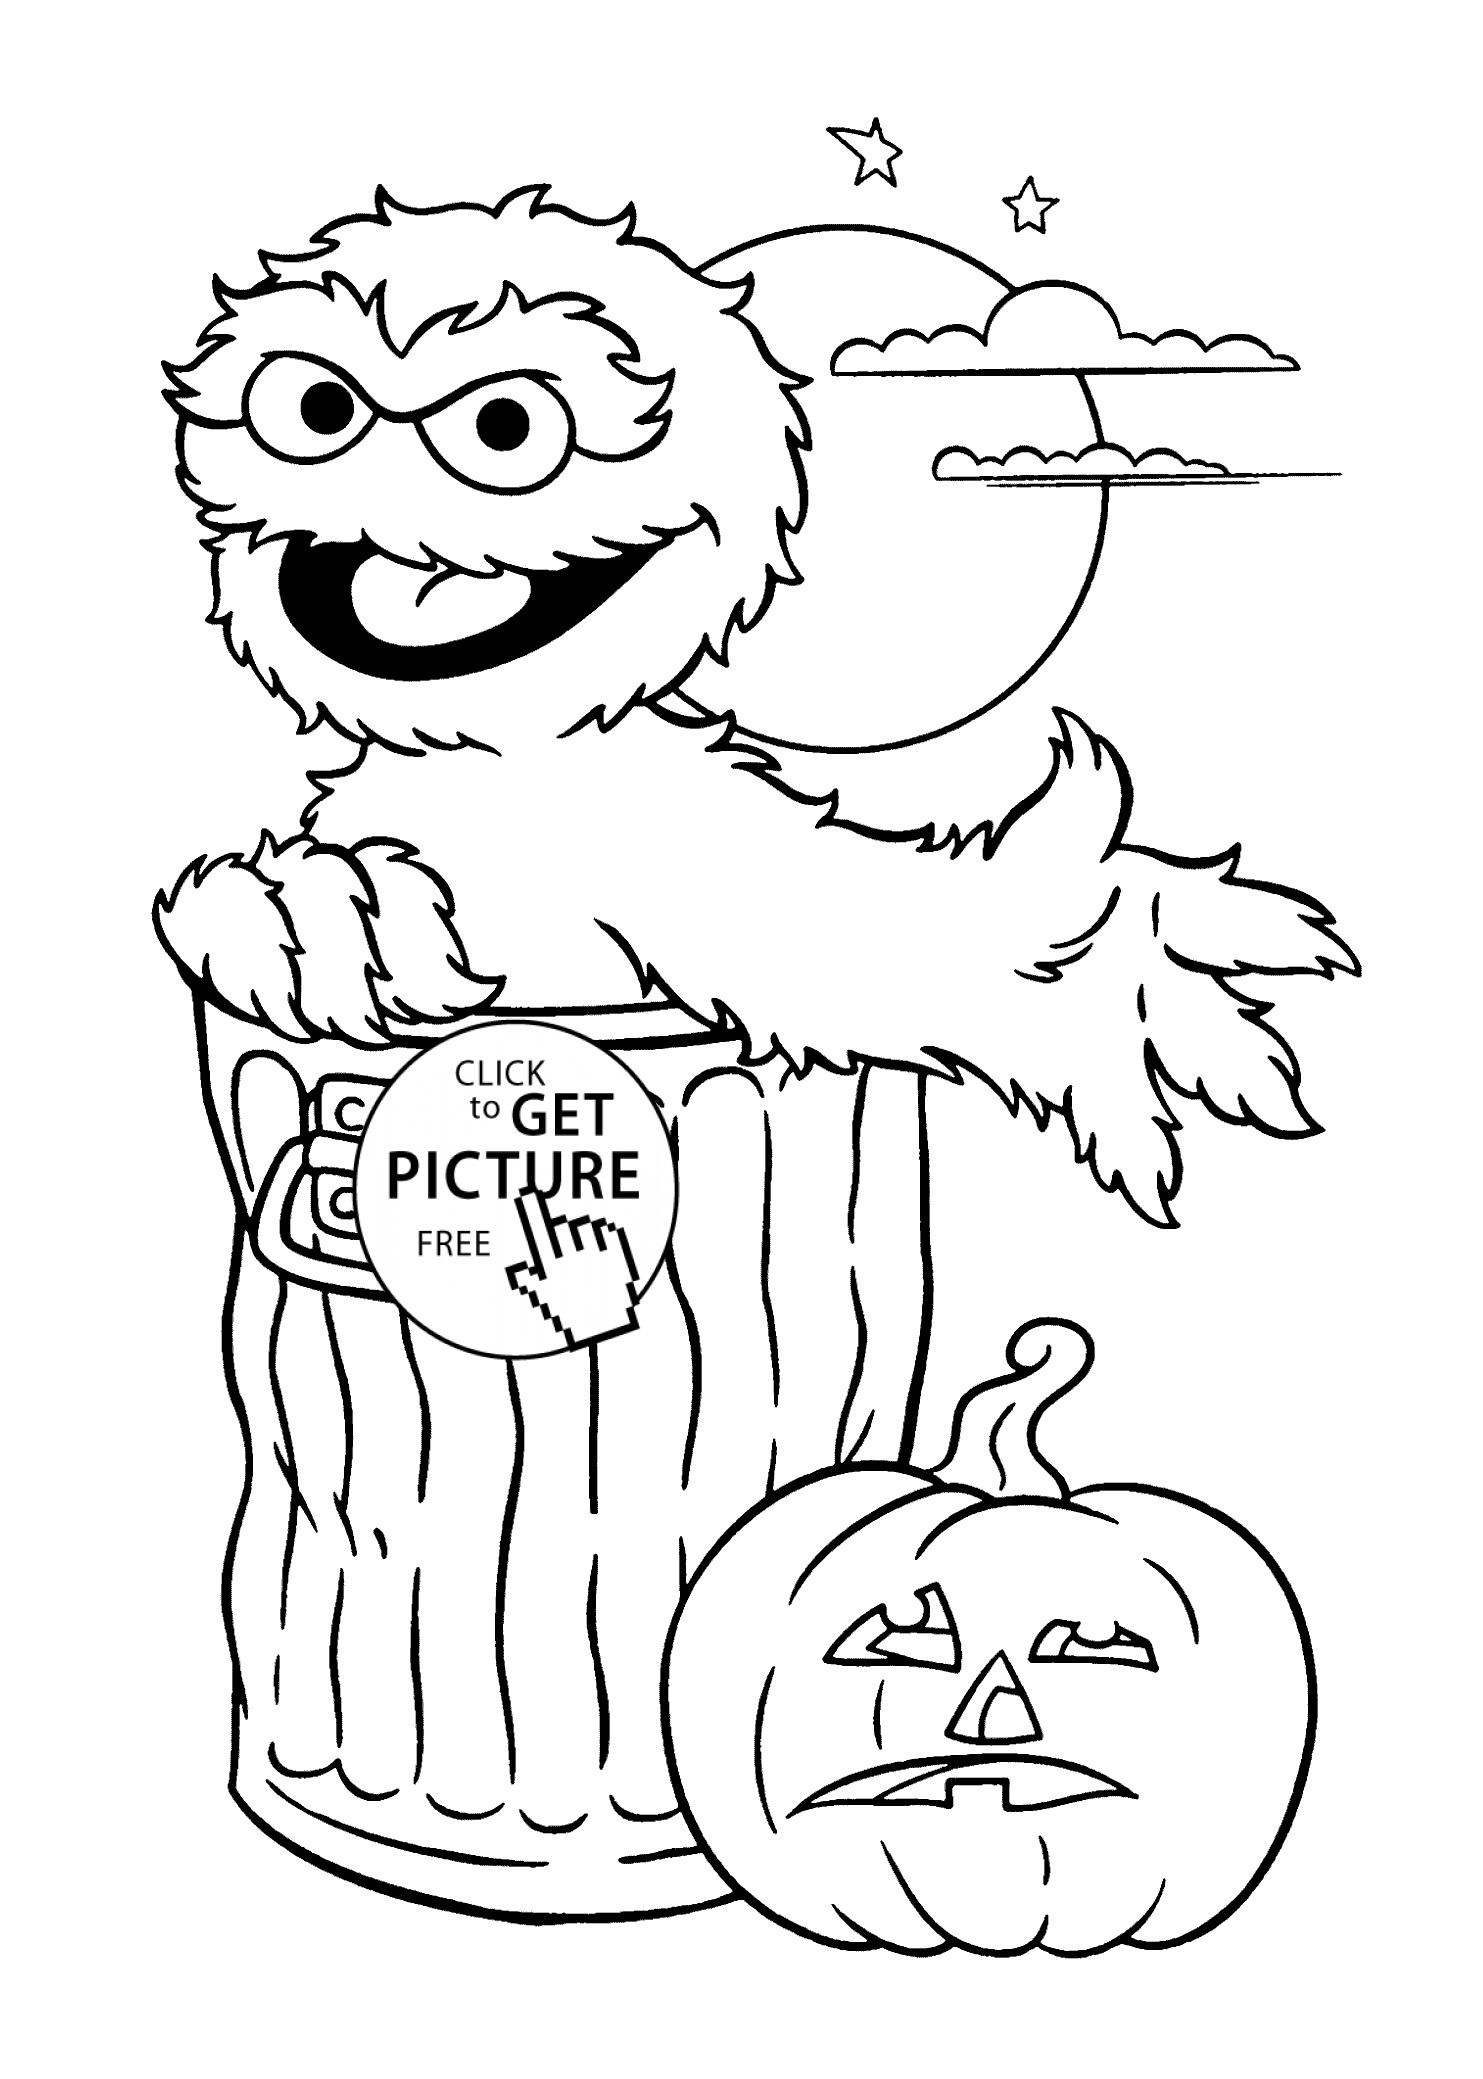 Printable Halloween Coloring Pages For Kids
 Halloween coloring page for kids printable free Happy